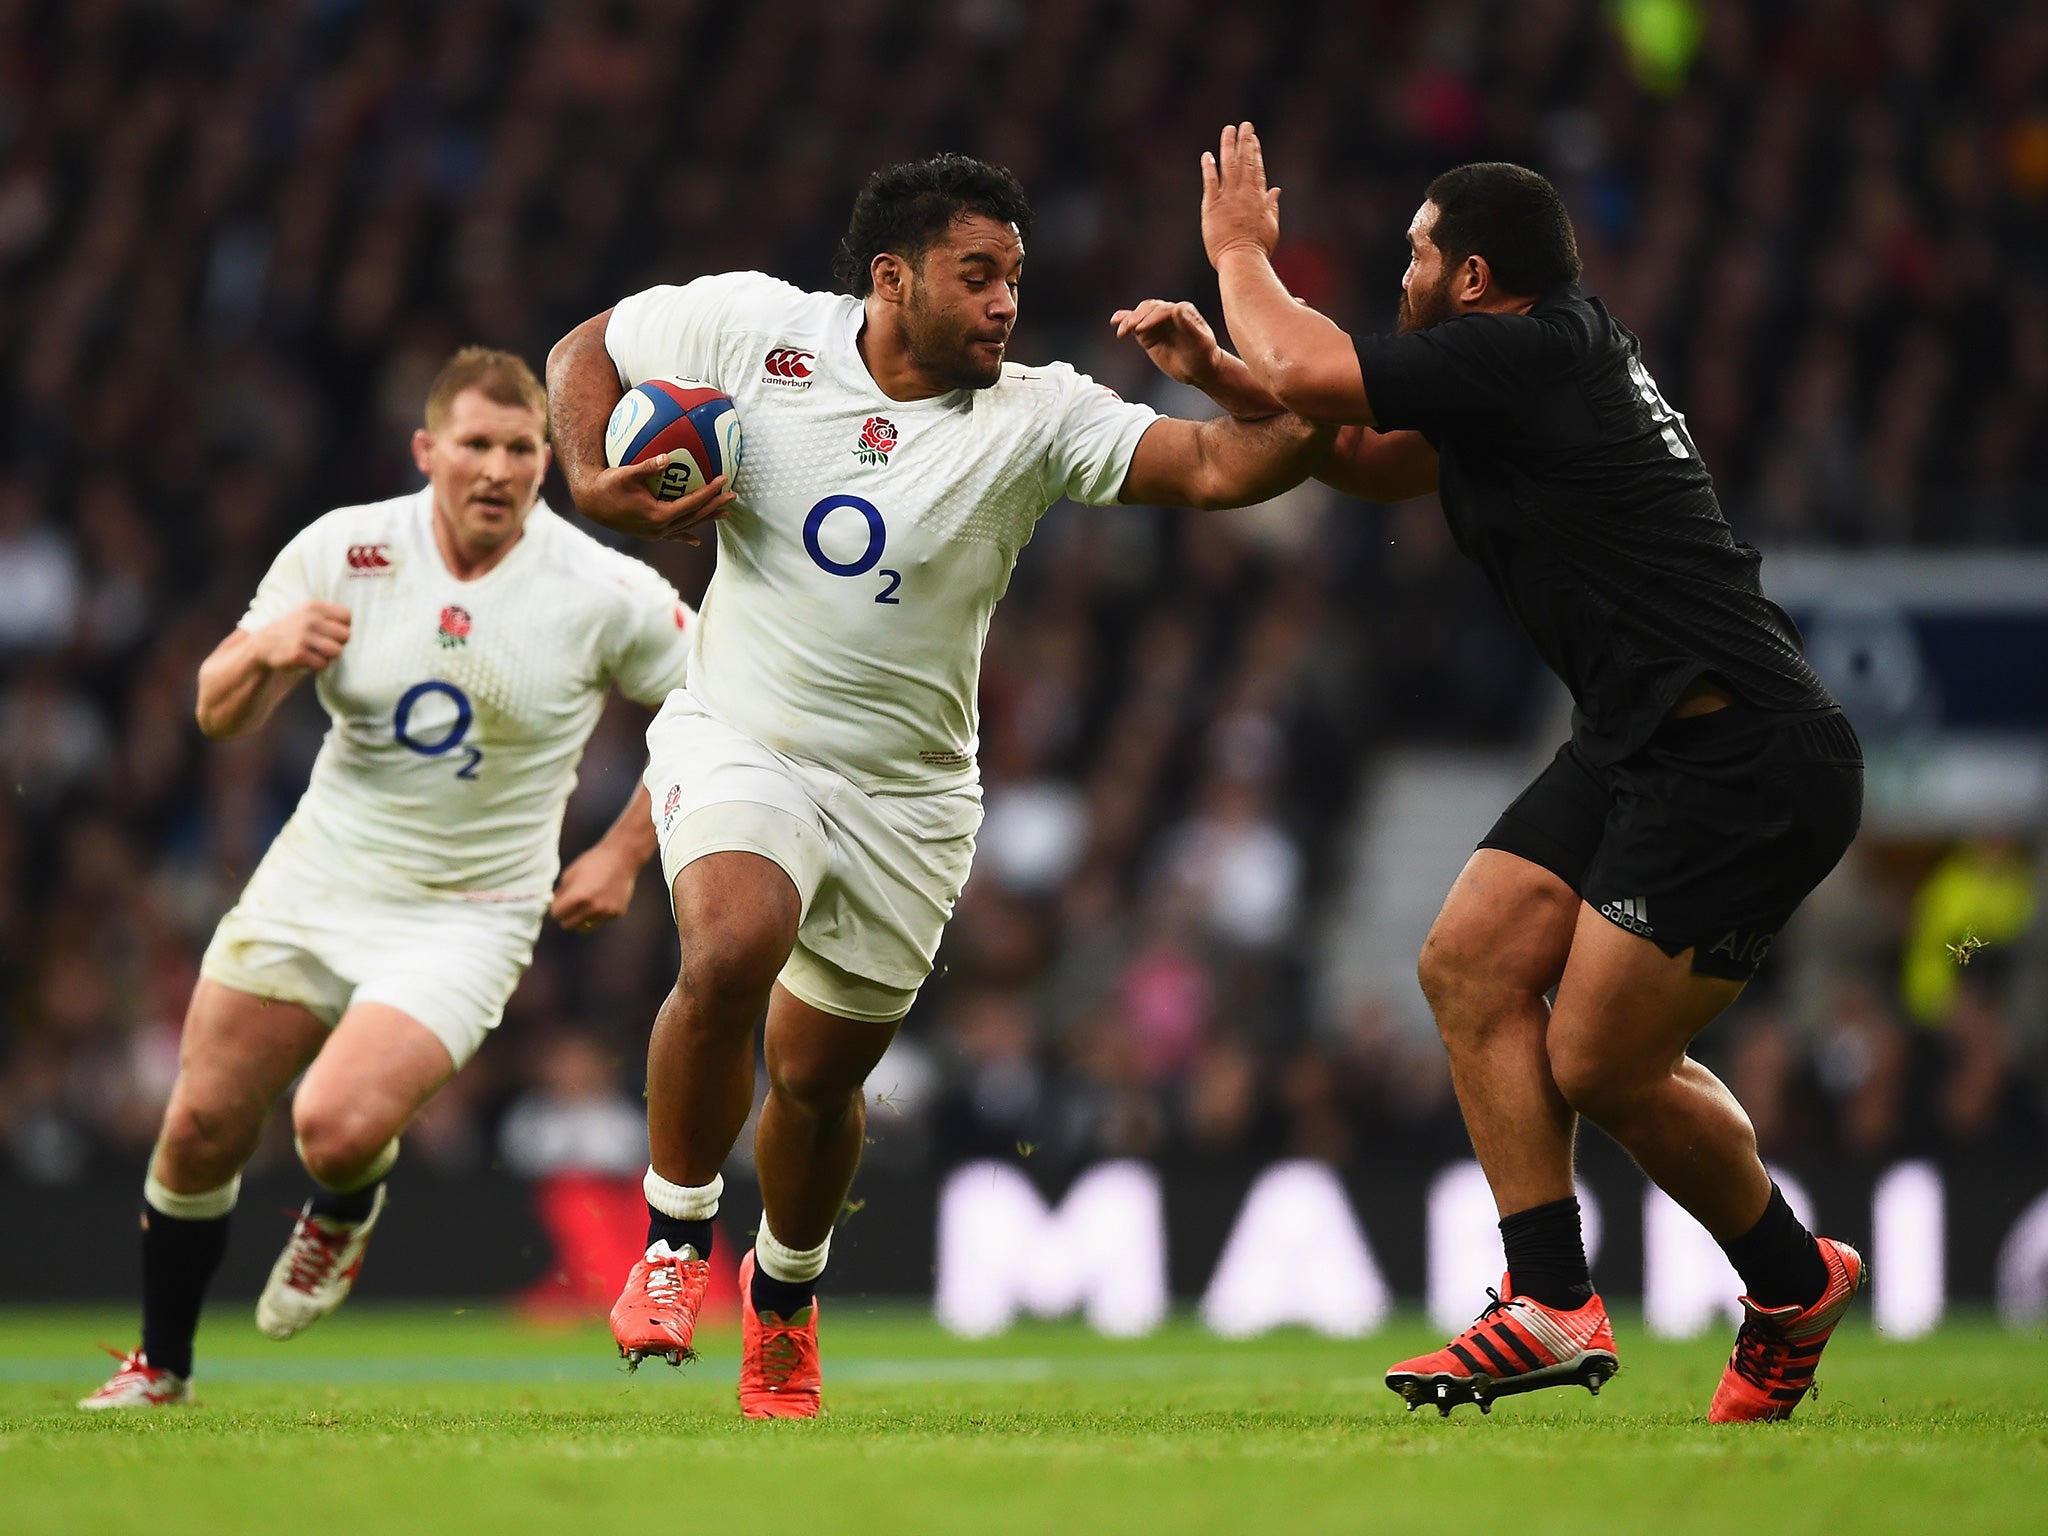 Vunipola was dropped by England head coach Stuart Lancaster during a patch of poor form